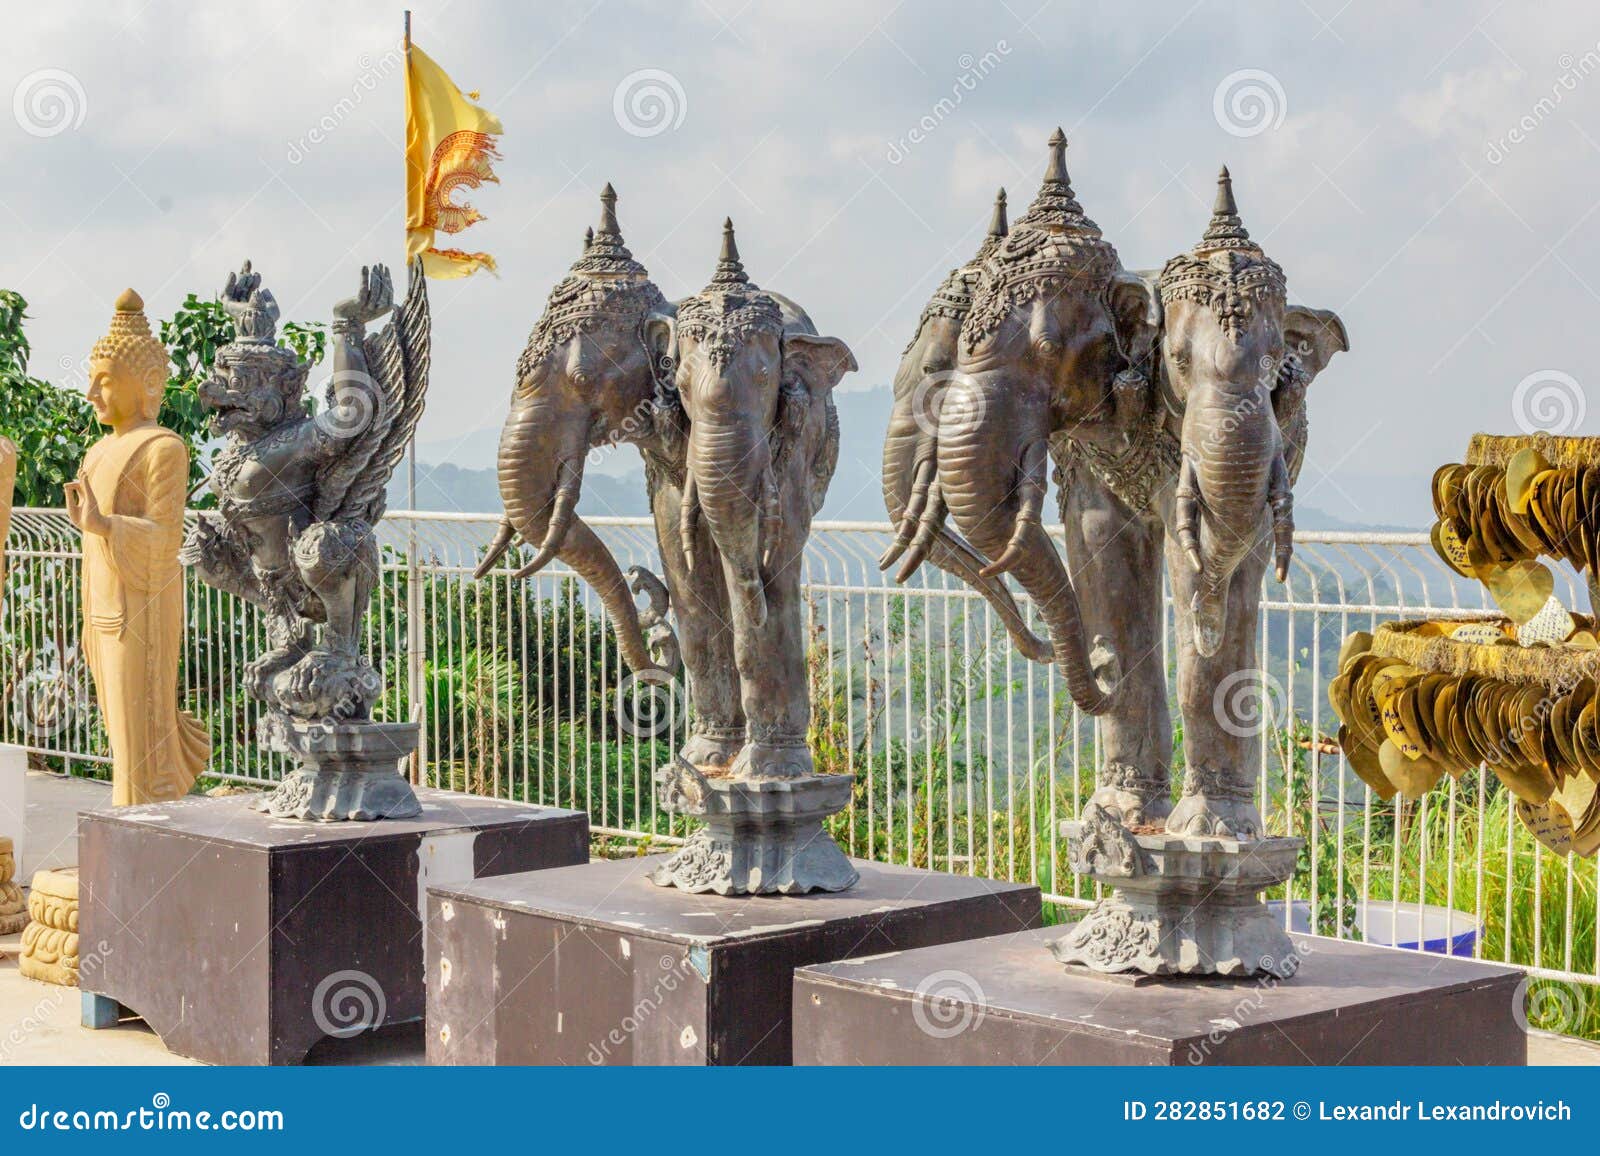 Statues of Buddha, Elephants and Mythical Creature with Wings in the ...